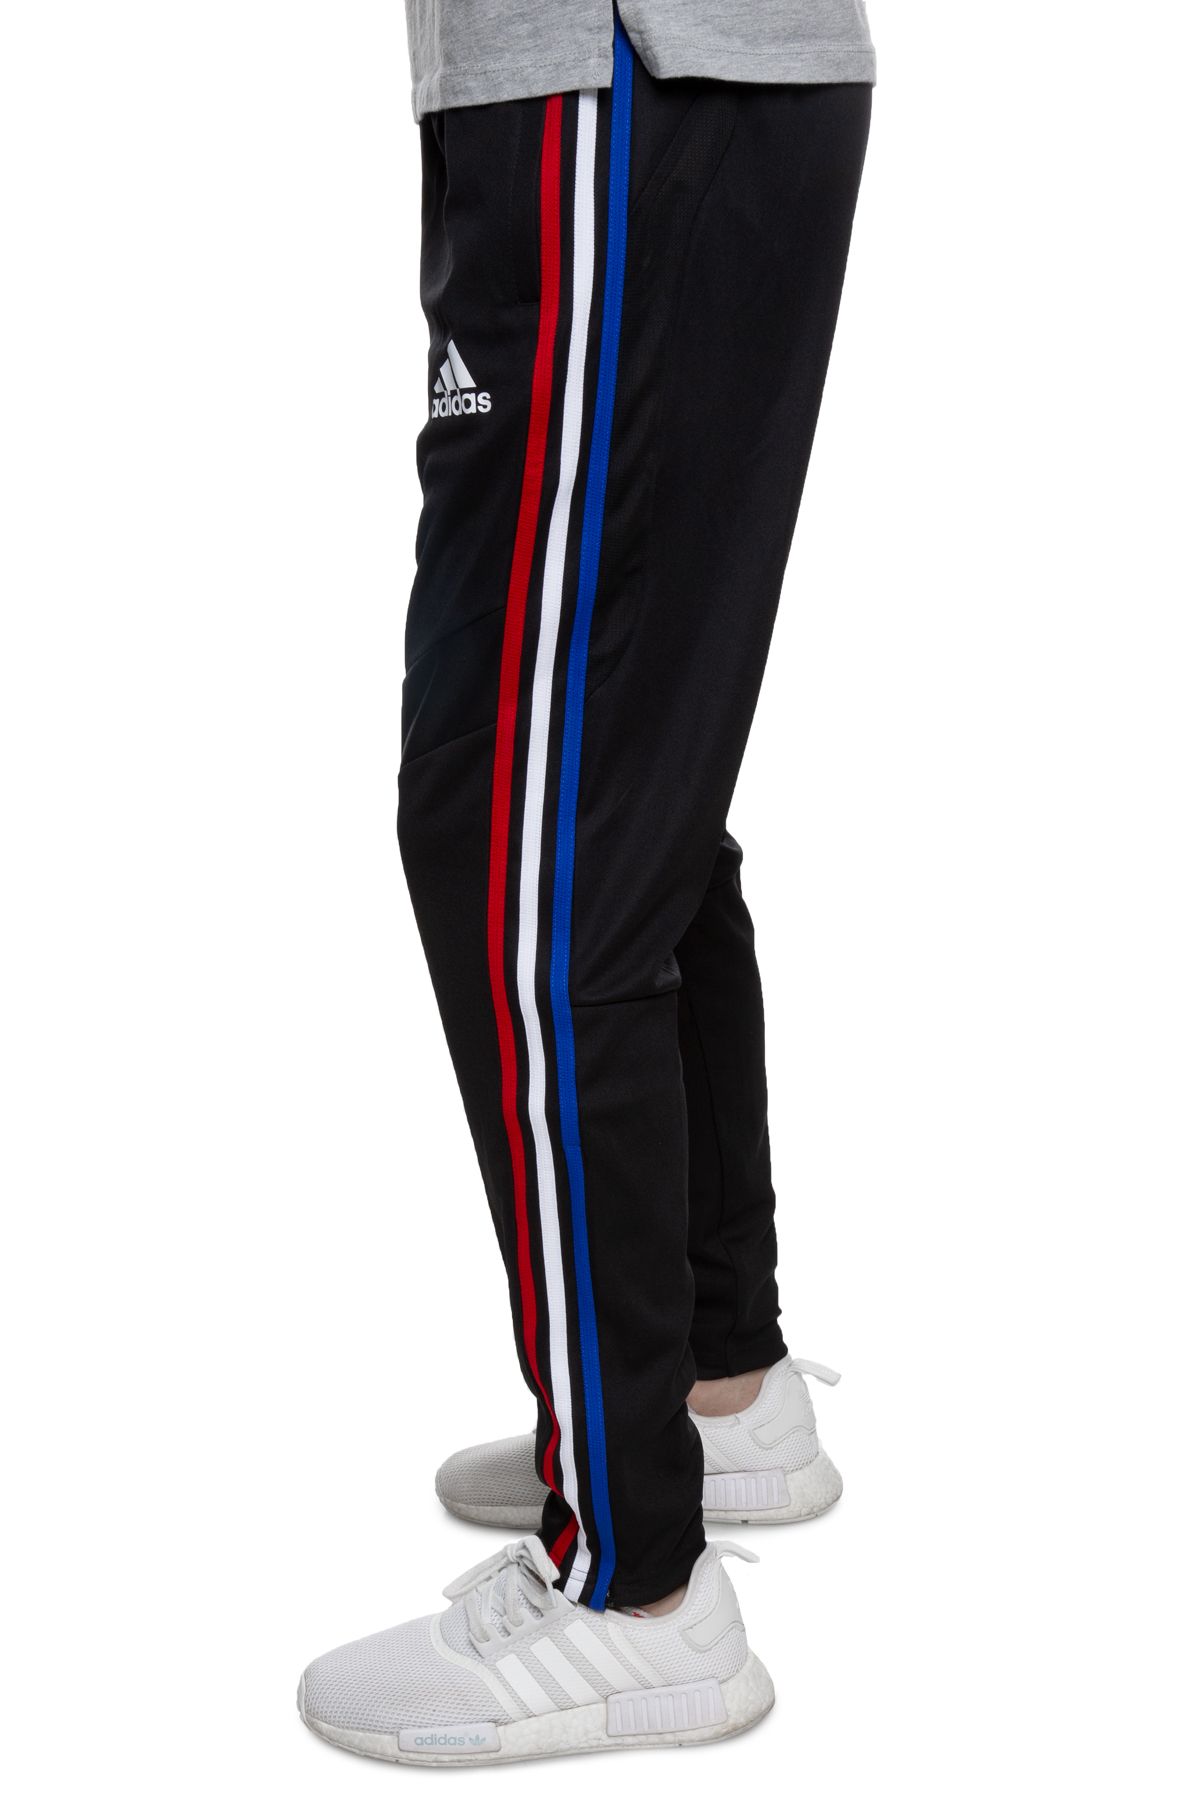 red white and blue adidas pants